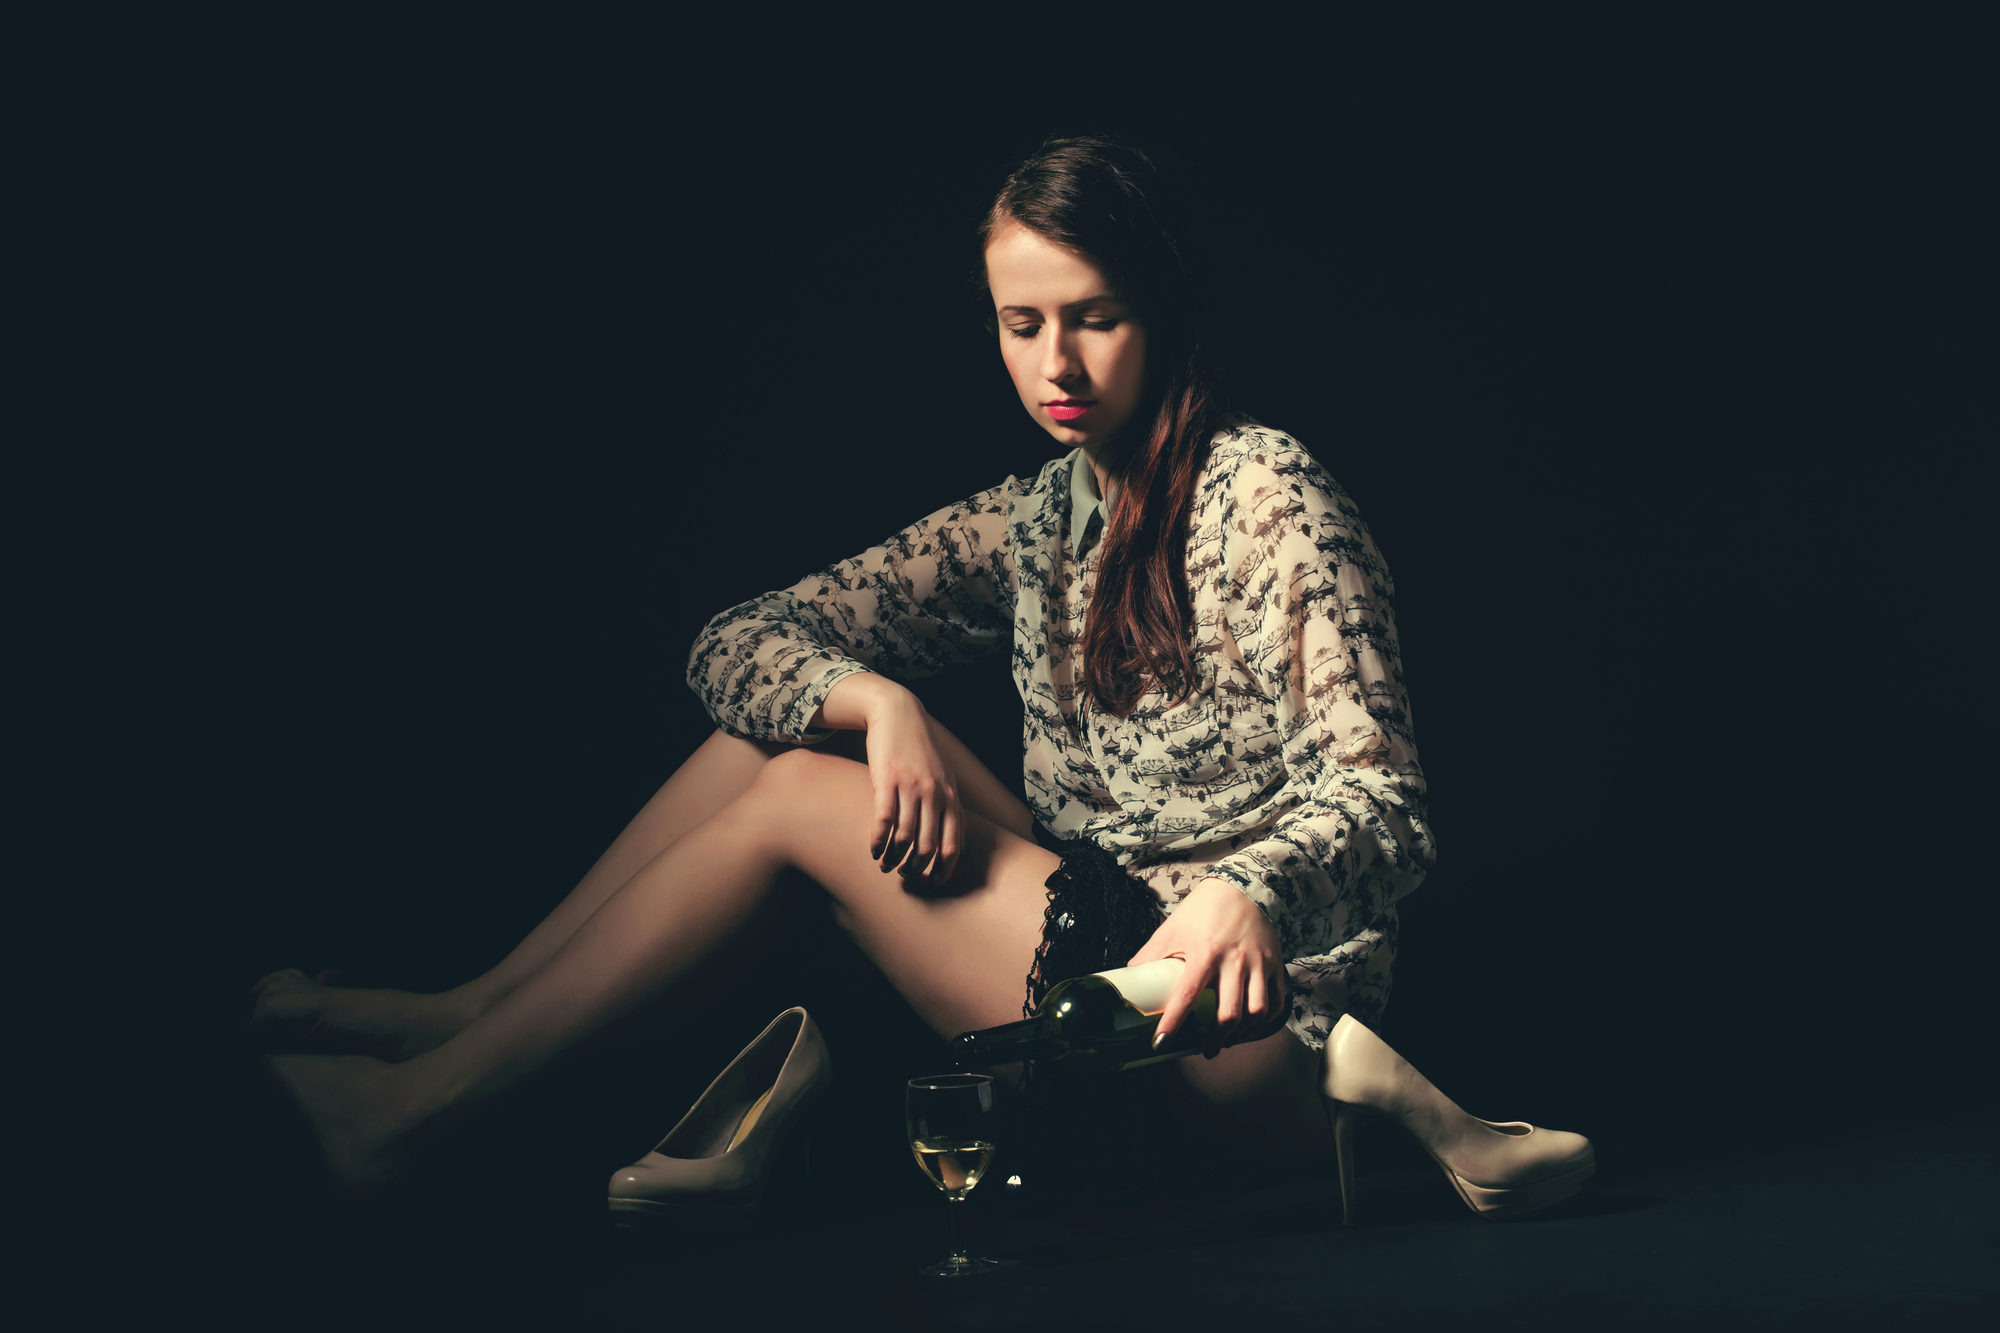 Studio portrait of a beautiful young brunette woman holding a bottle of white wine in retro colors